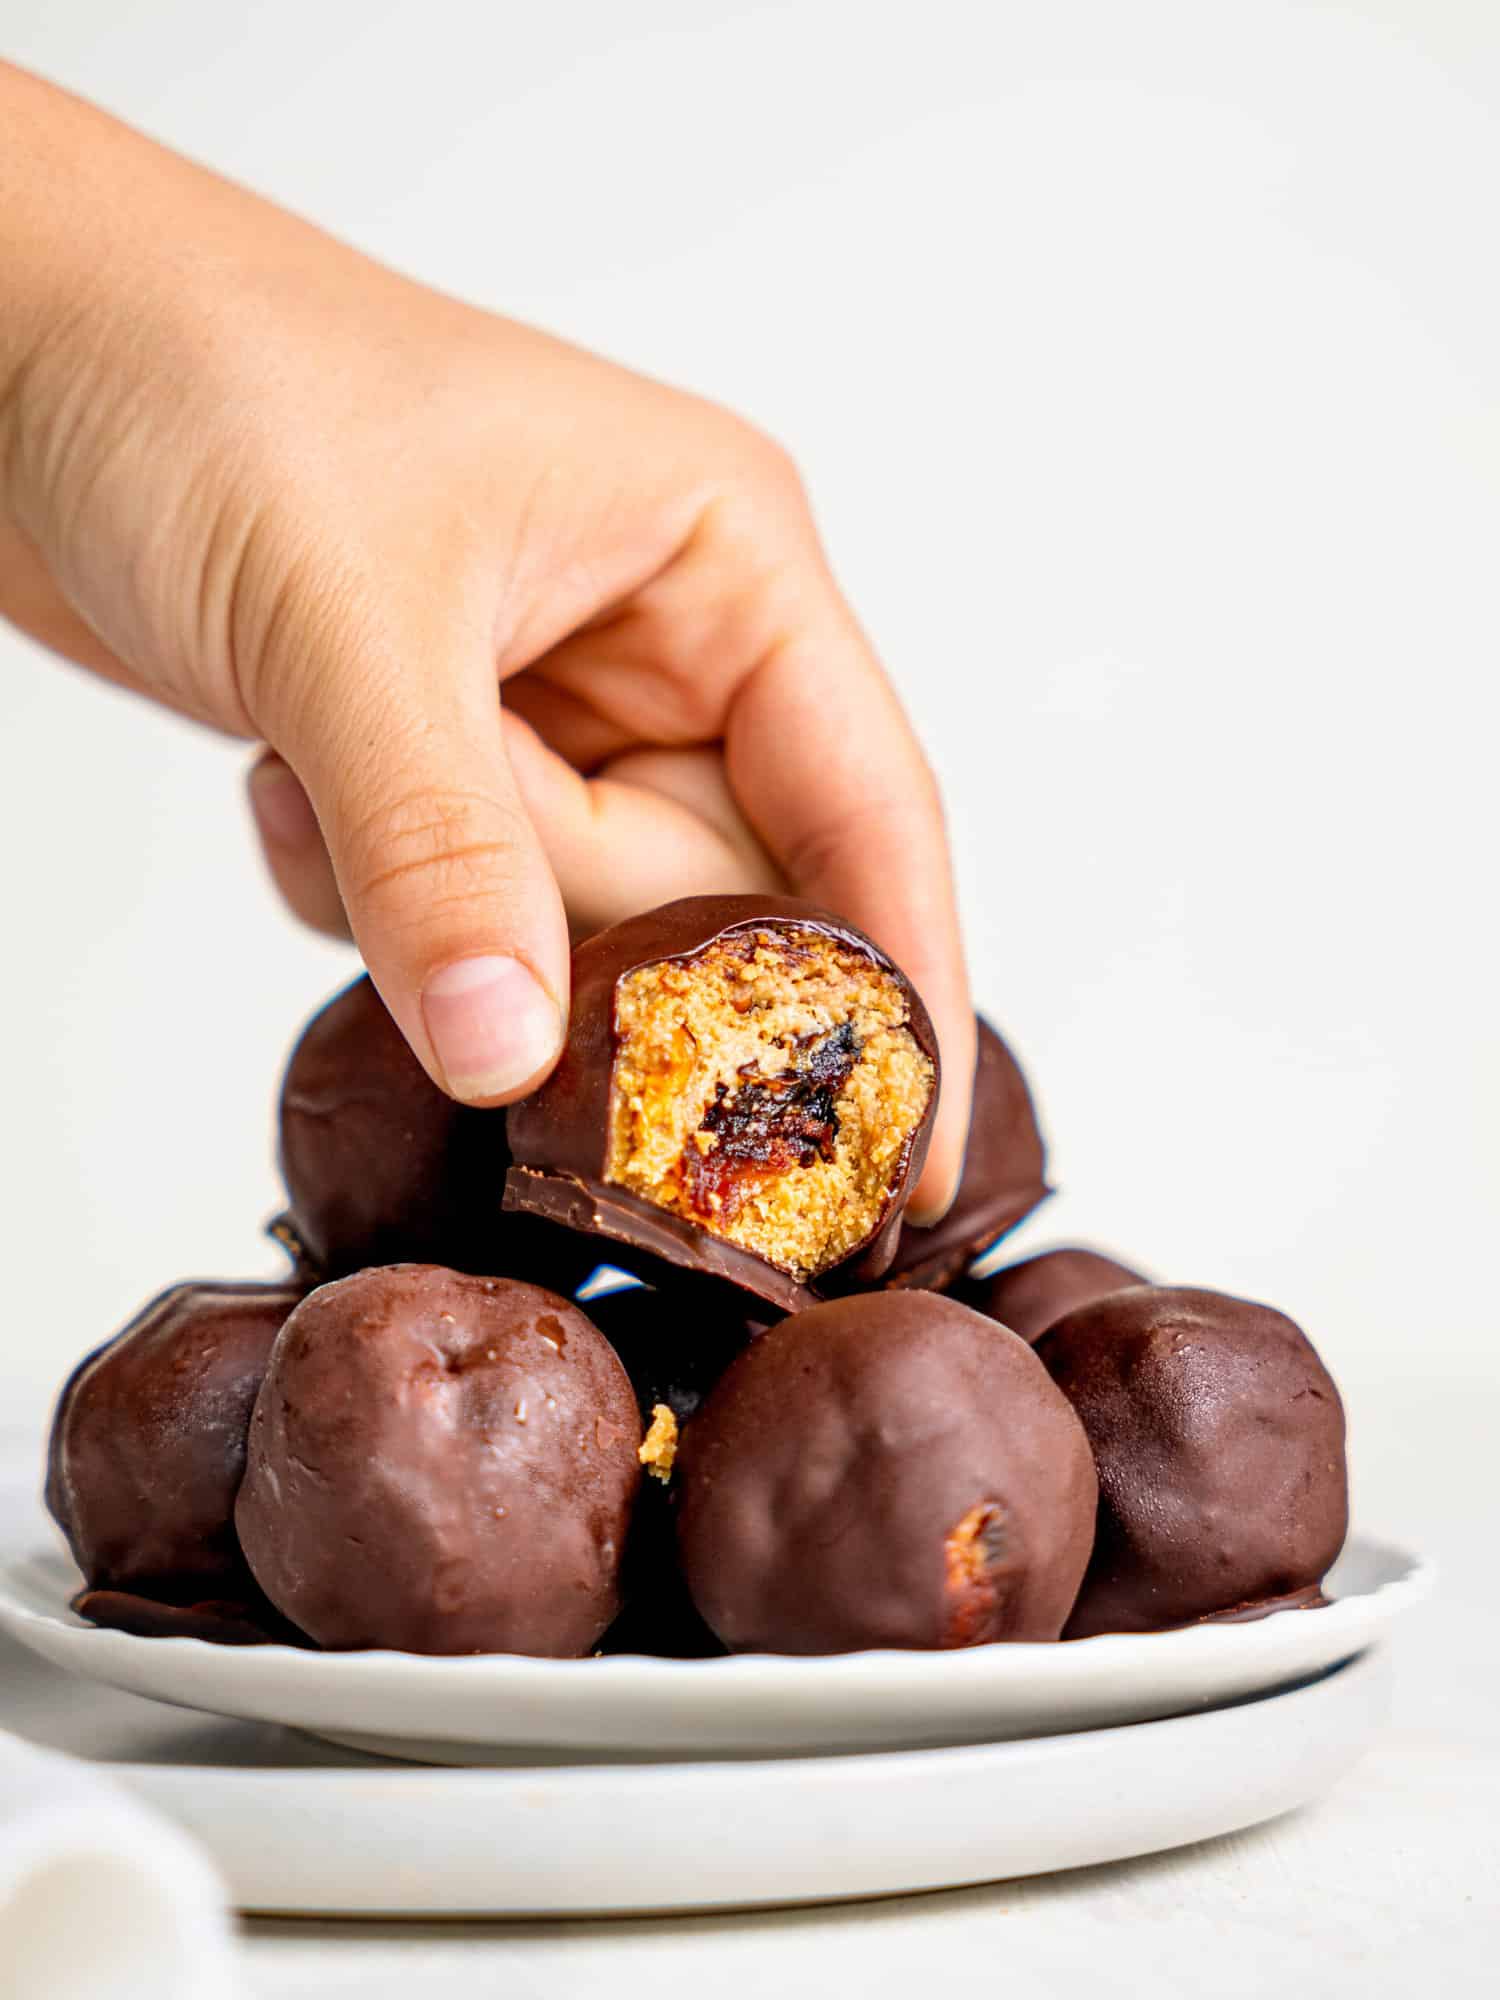 Snickers Energy Balls on a plate. a hand is holding one that a bite is missing from, as if picking it up.